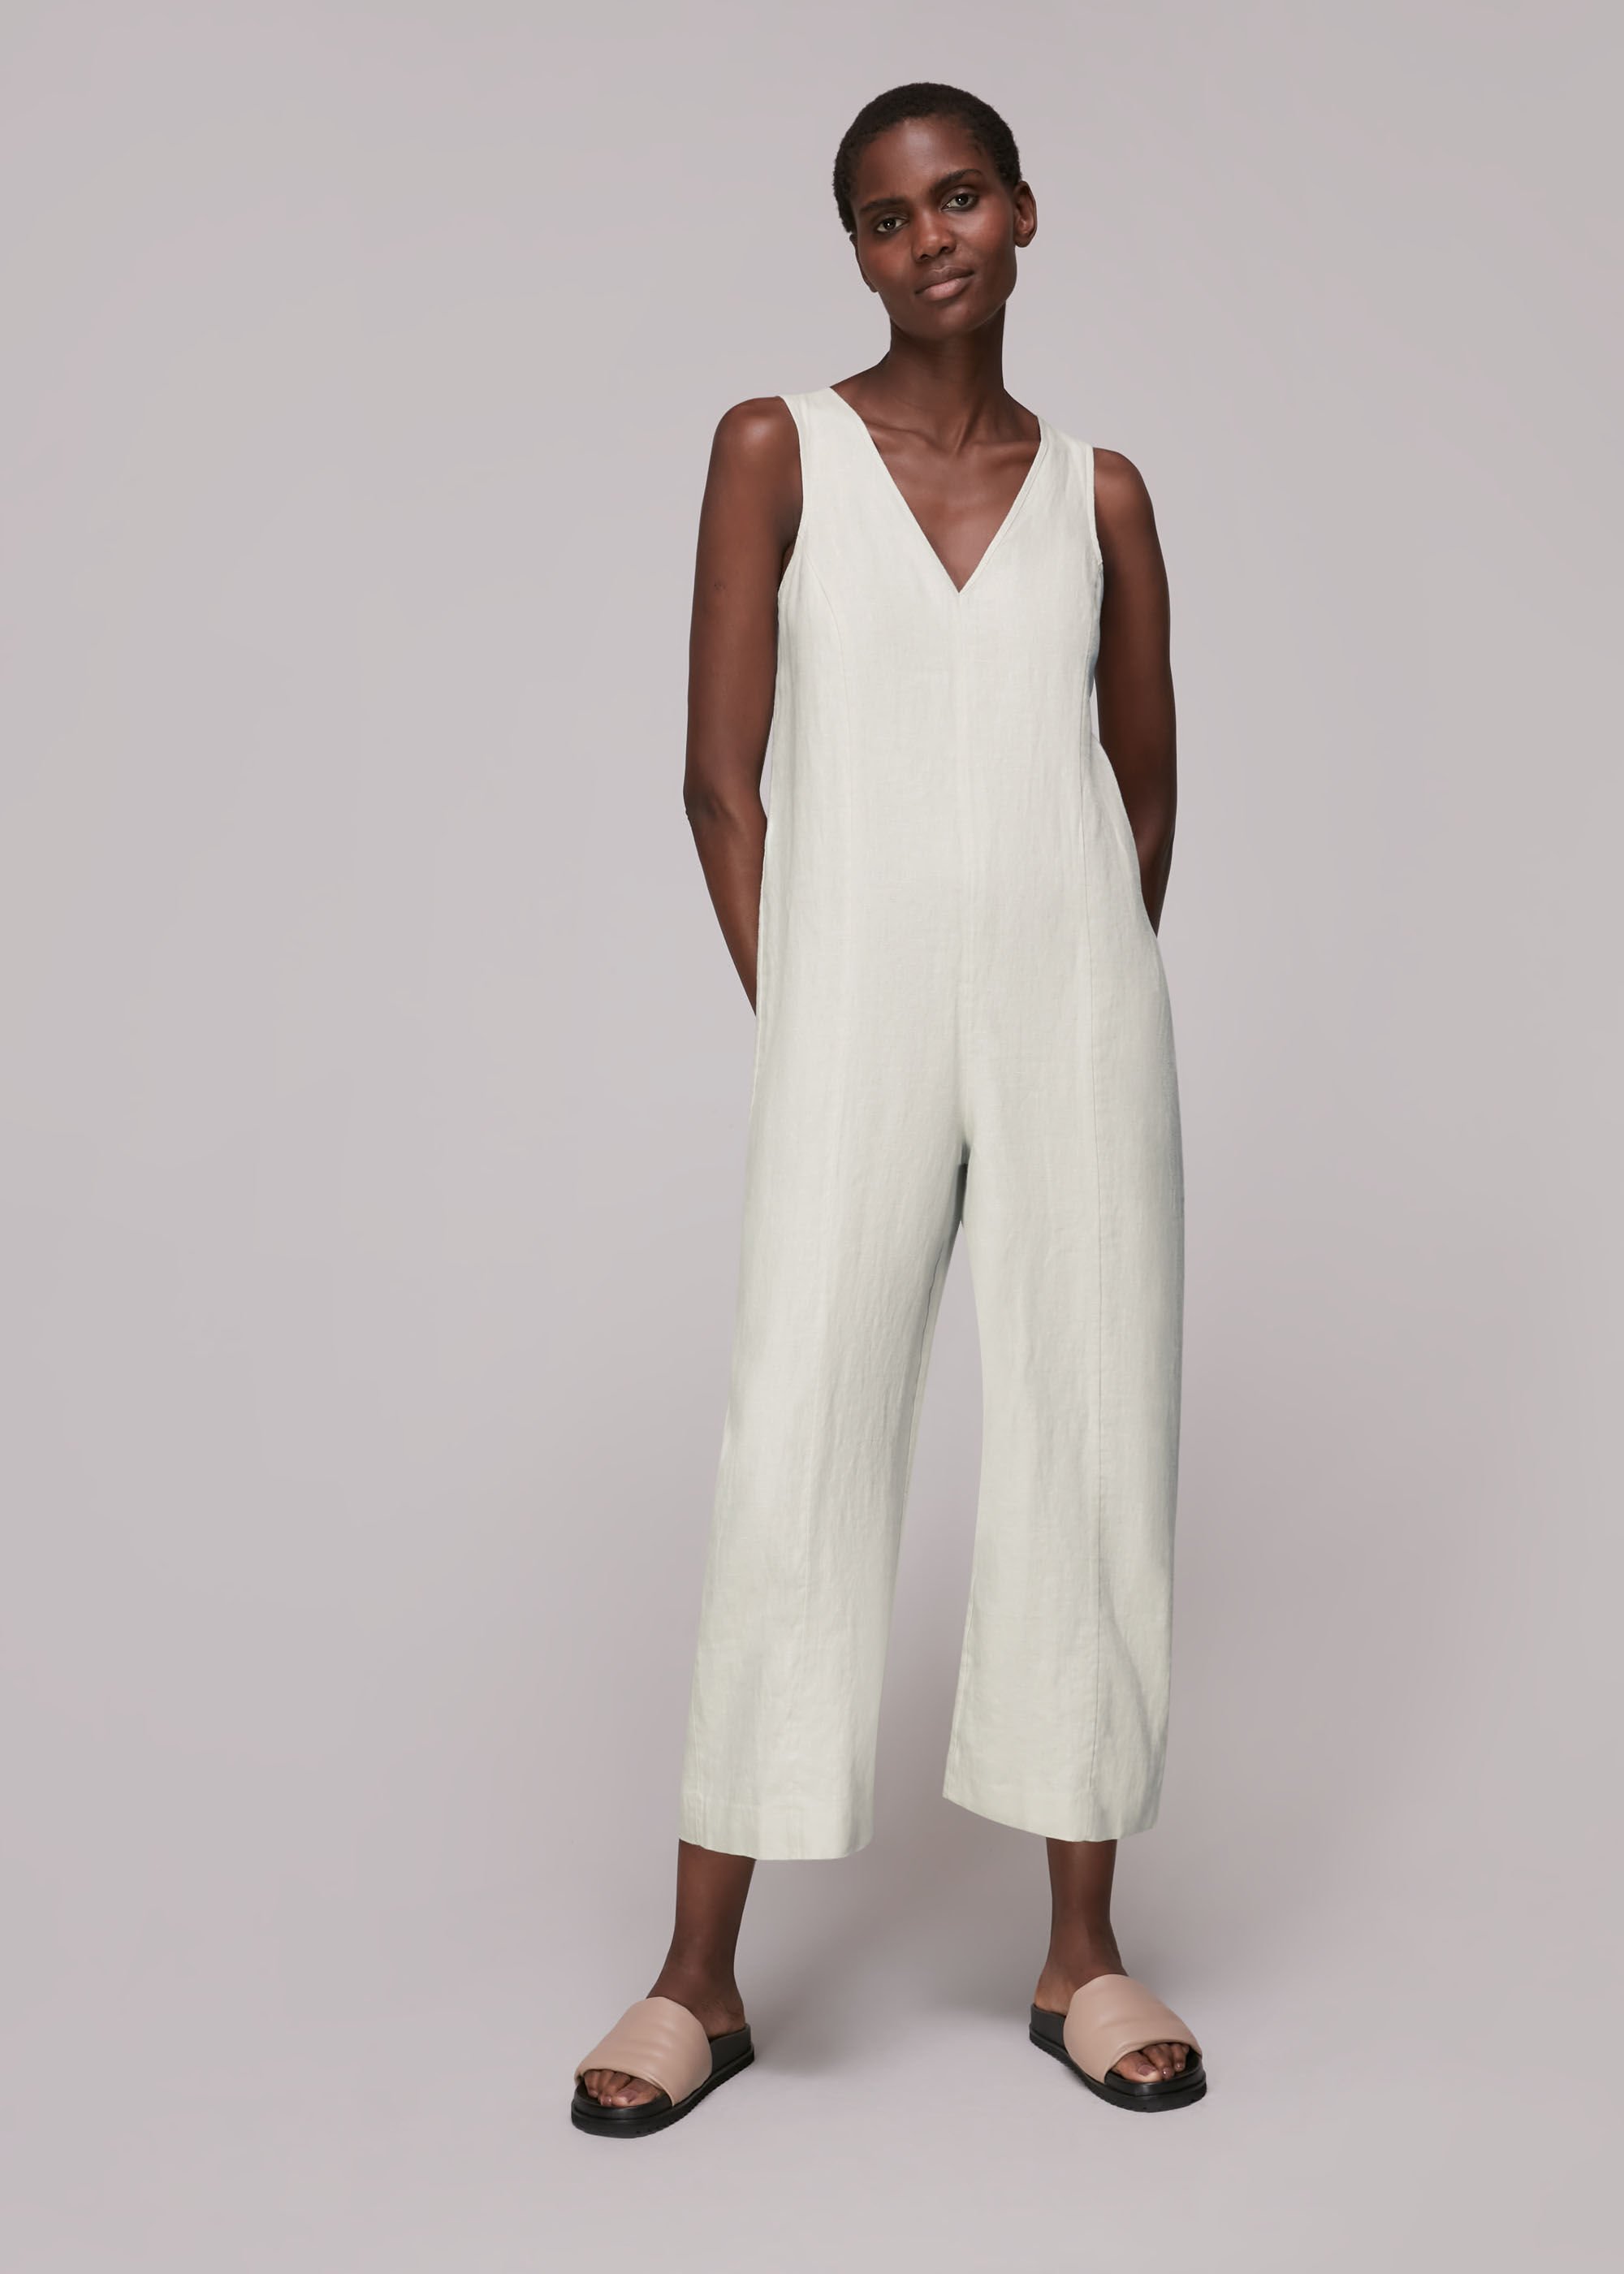 21 Linen Jumpsuits and Rompers to Help You Beat the Heat in Style   Fashionista